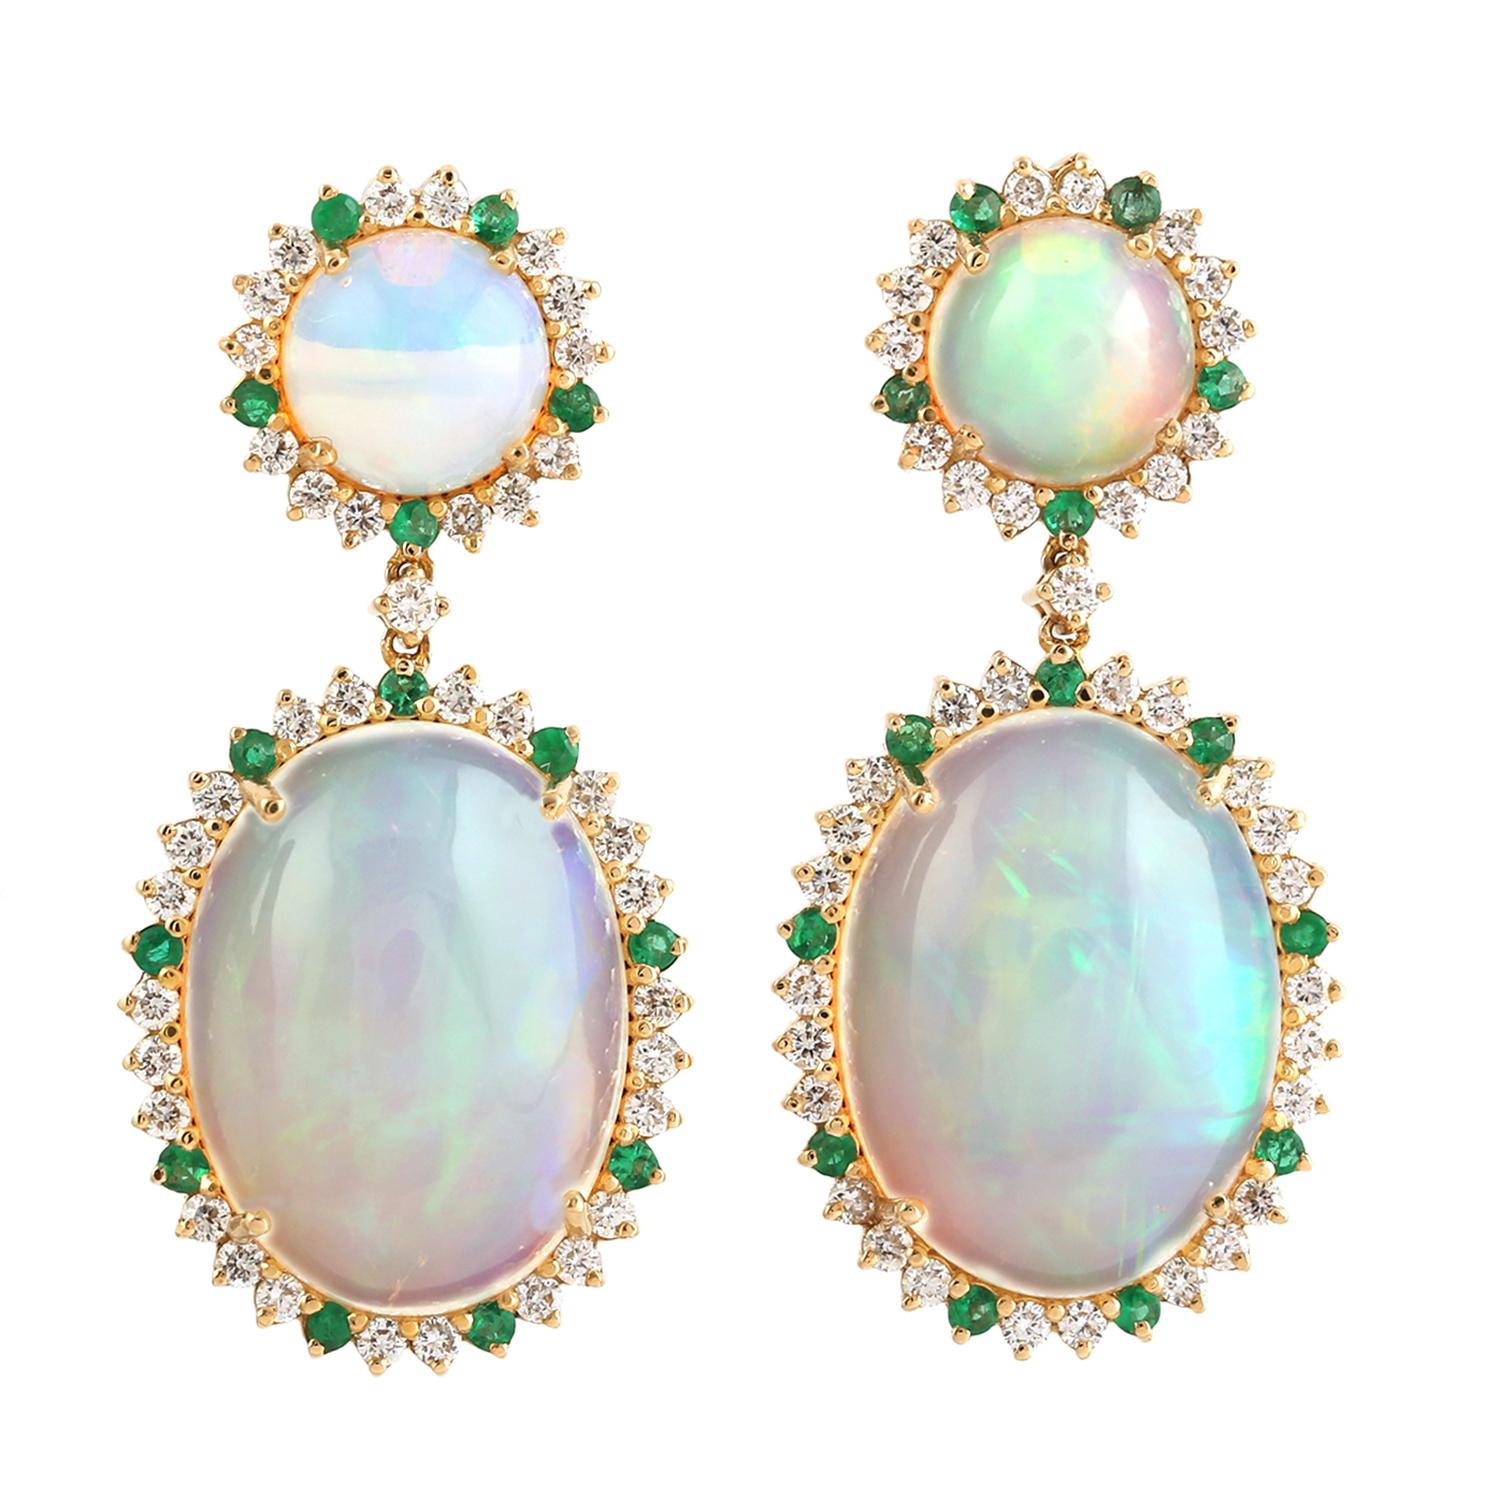 Cast in 14 karat gold. These earrings are hand set in 13.05 carats Ethiopian opal, .34 carats emerald, and .82 carats of sparkling diamonds. 

FOLLOW MEGHNA JEWELS storefront to view the latest collection & exclusive pieces. Meghna Jewels is proudly